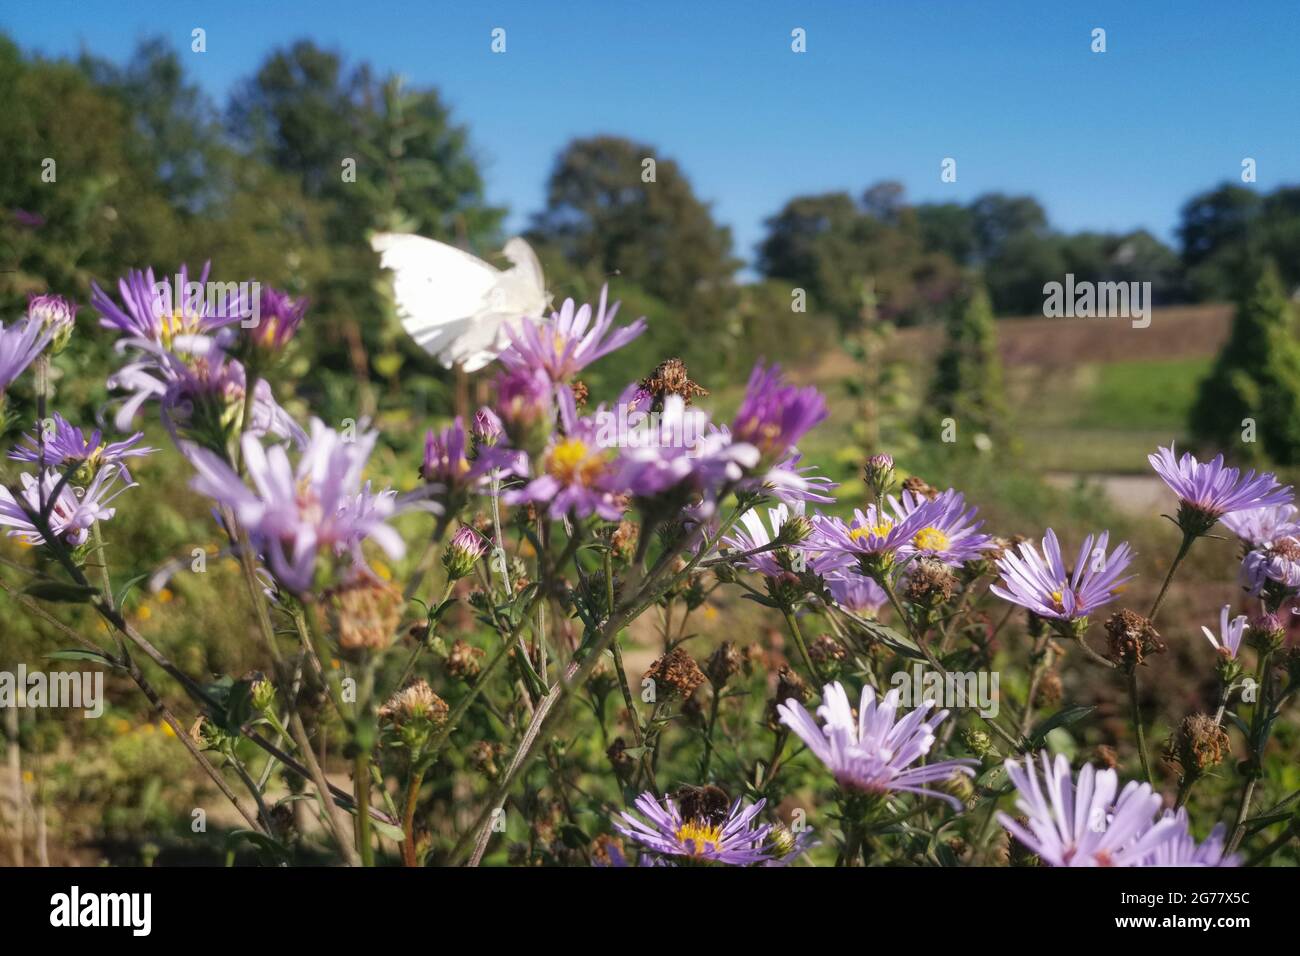 Closeup of a group of vibrant purple wood asters in a lush green field with a white butterfly Stock Photo